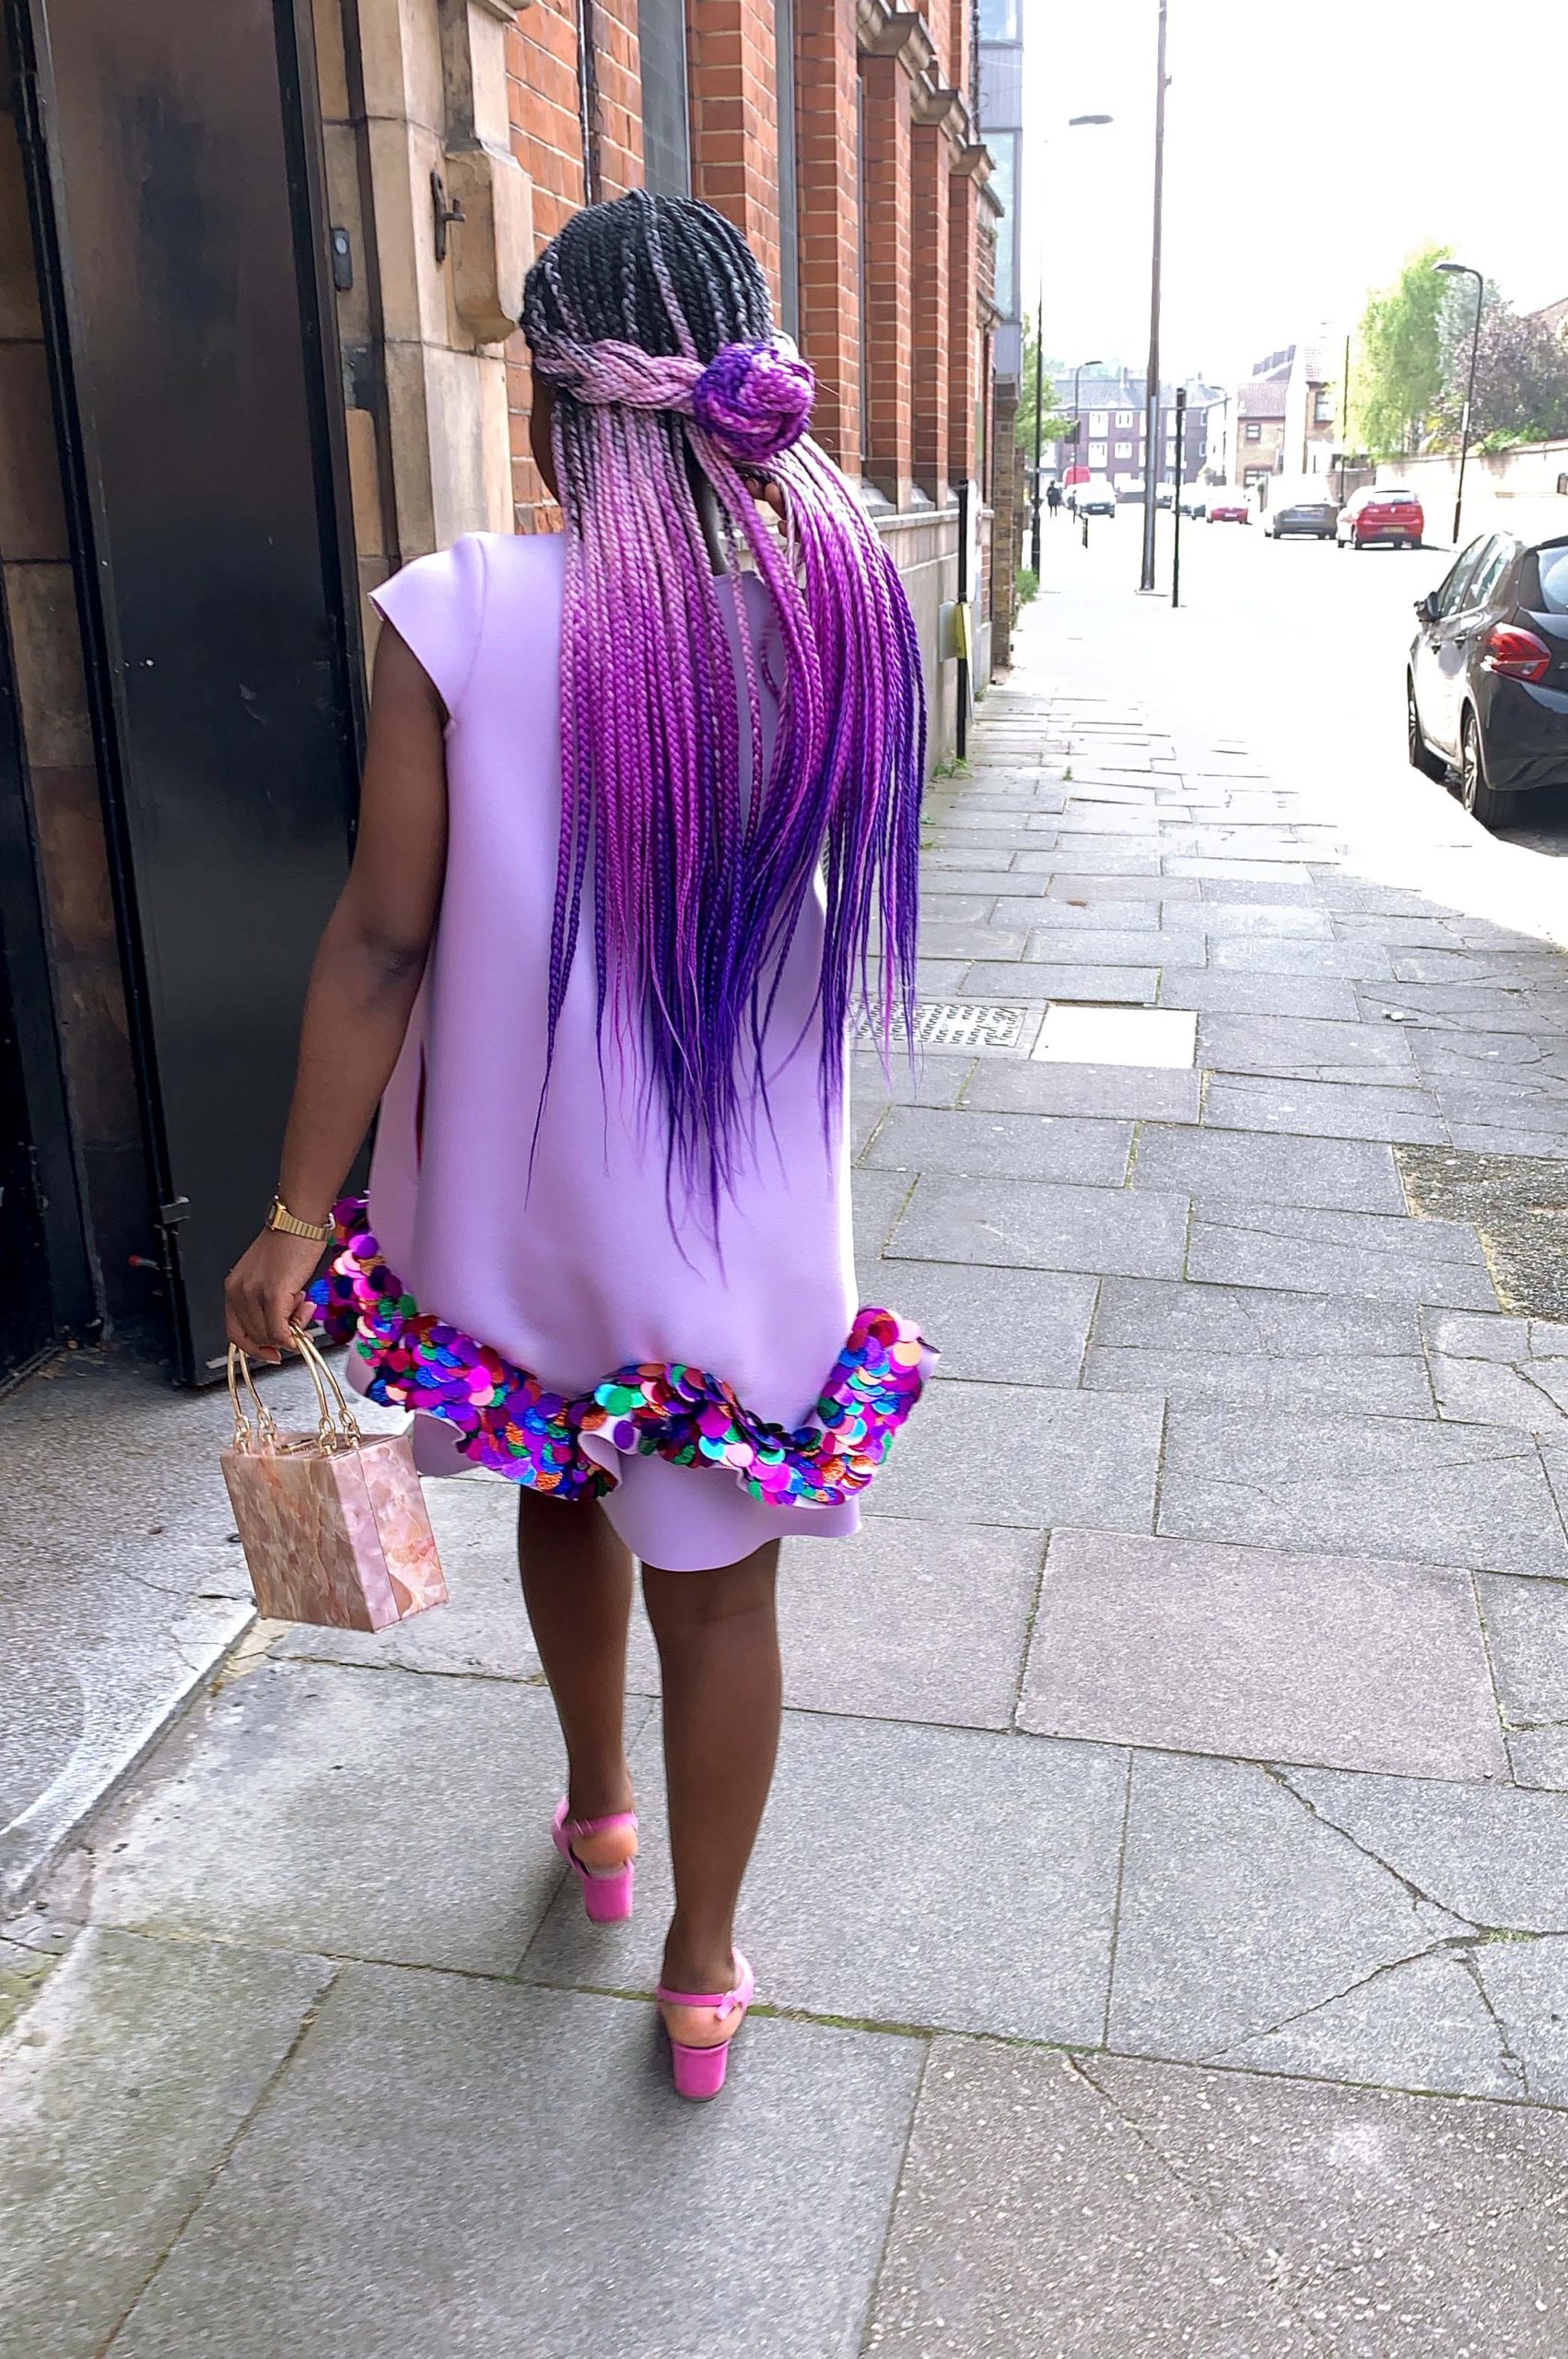 Black women with colourful hair wearing a lilac neoprene dress